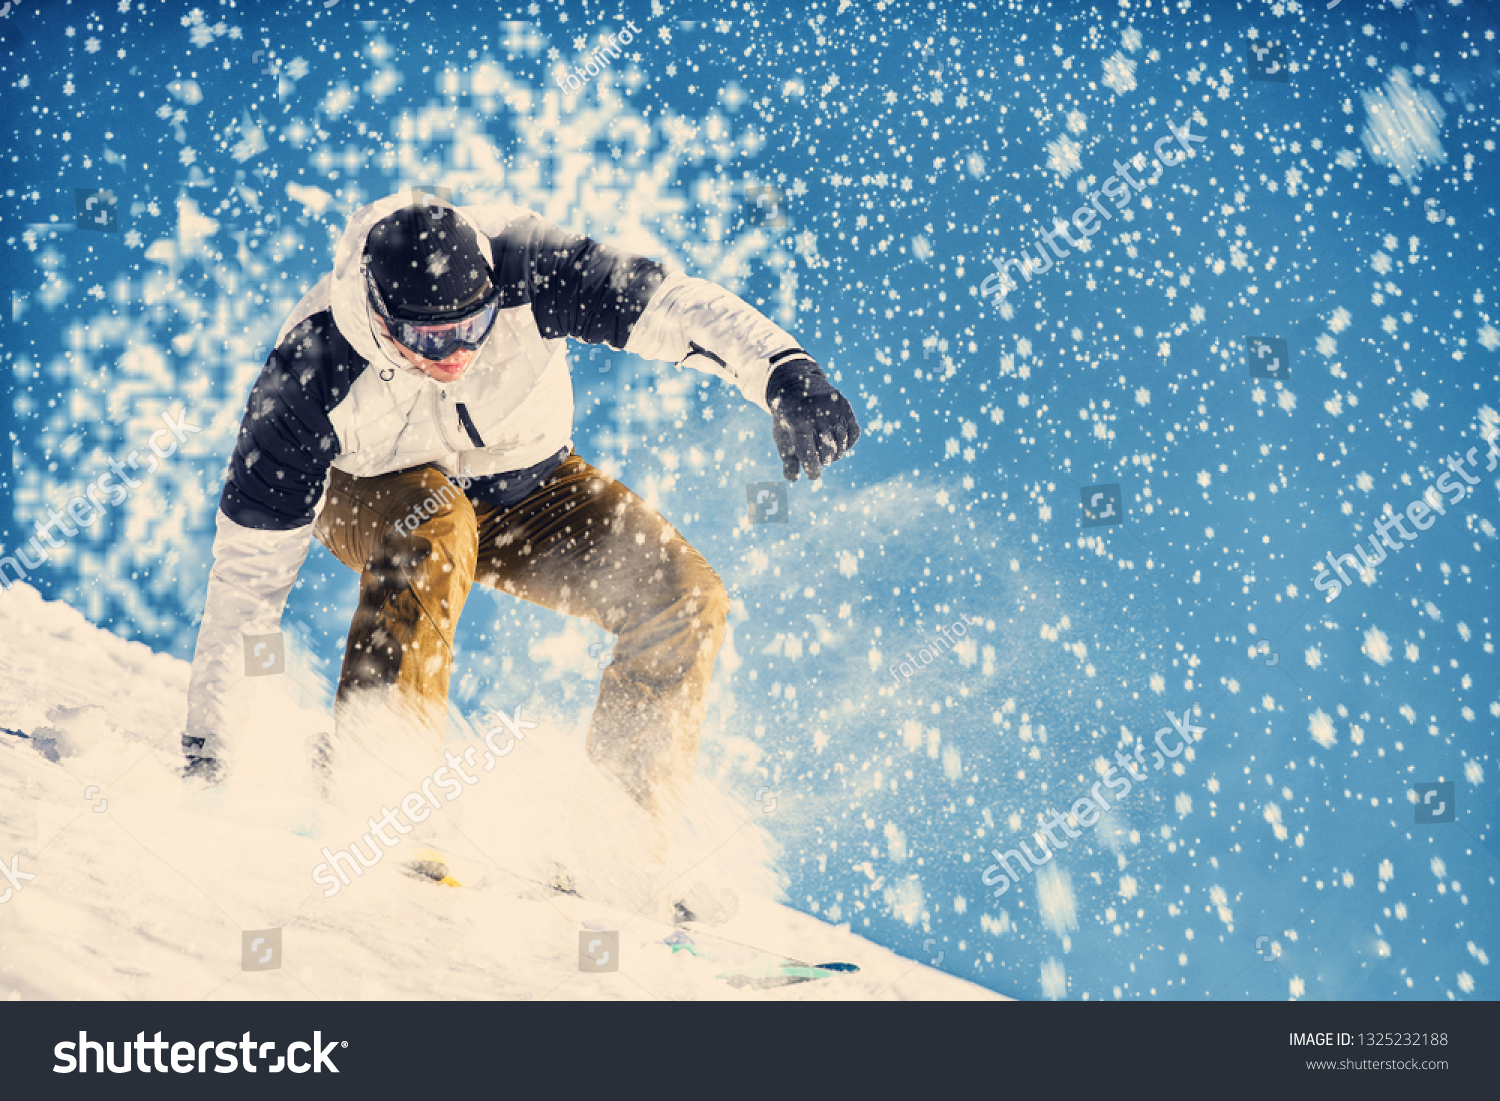 Young man snowboarder running down the slope in Alpine mountains. Winter sport and recreation, leisure outdoor activities. #1325232188